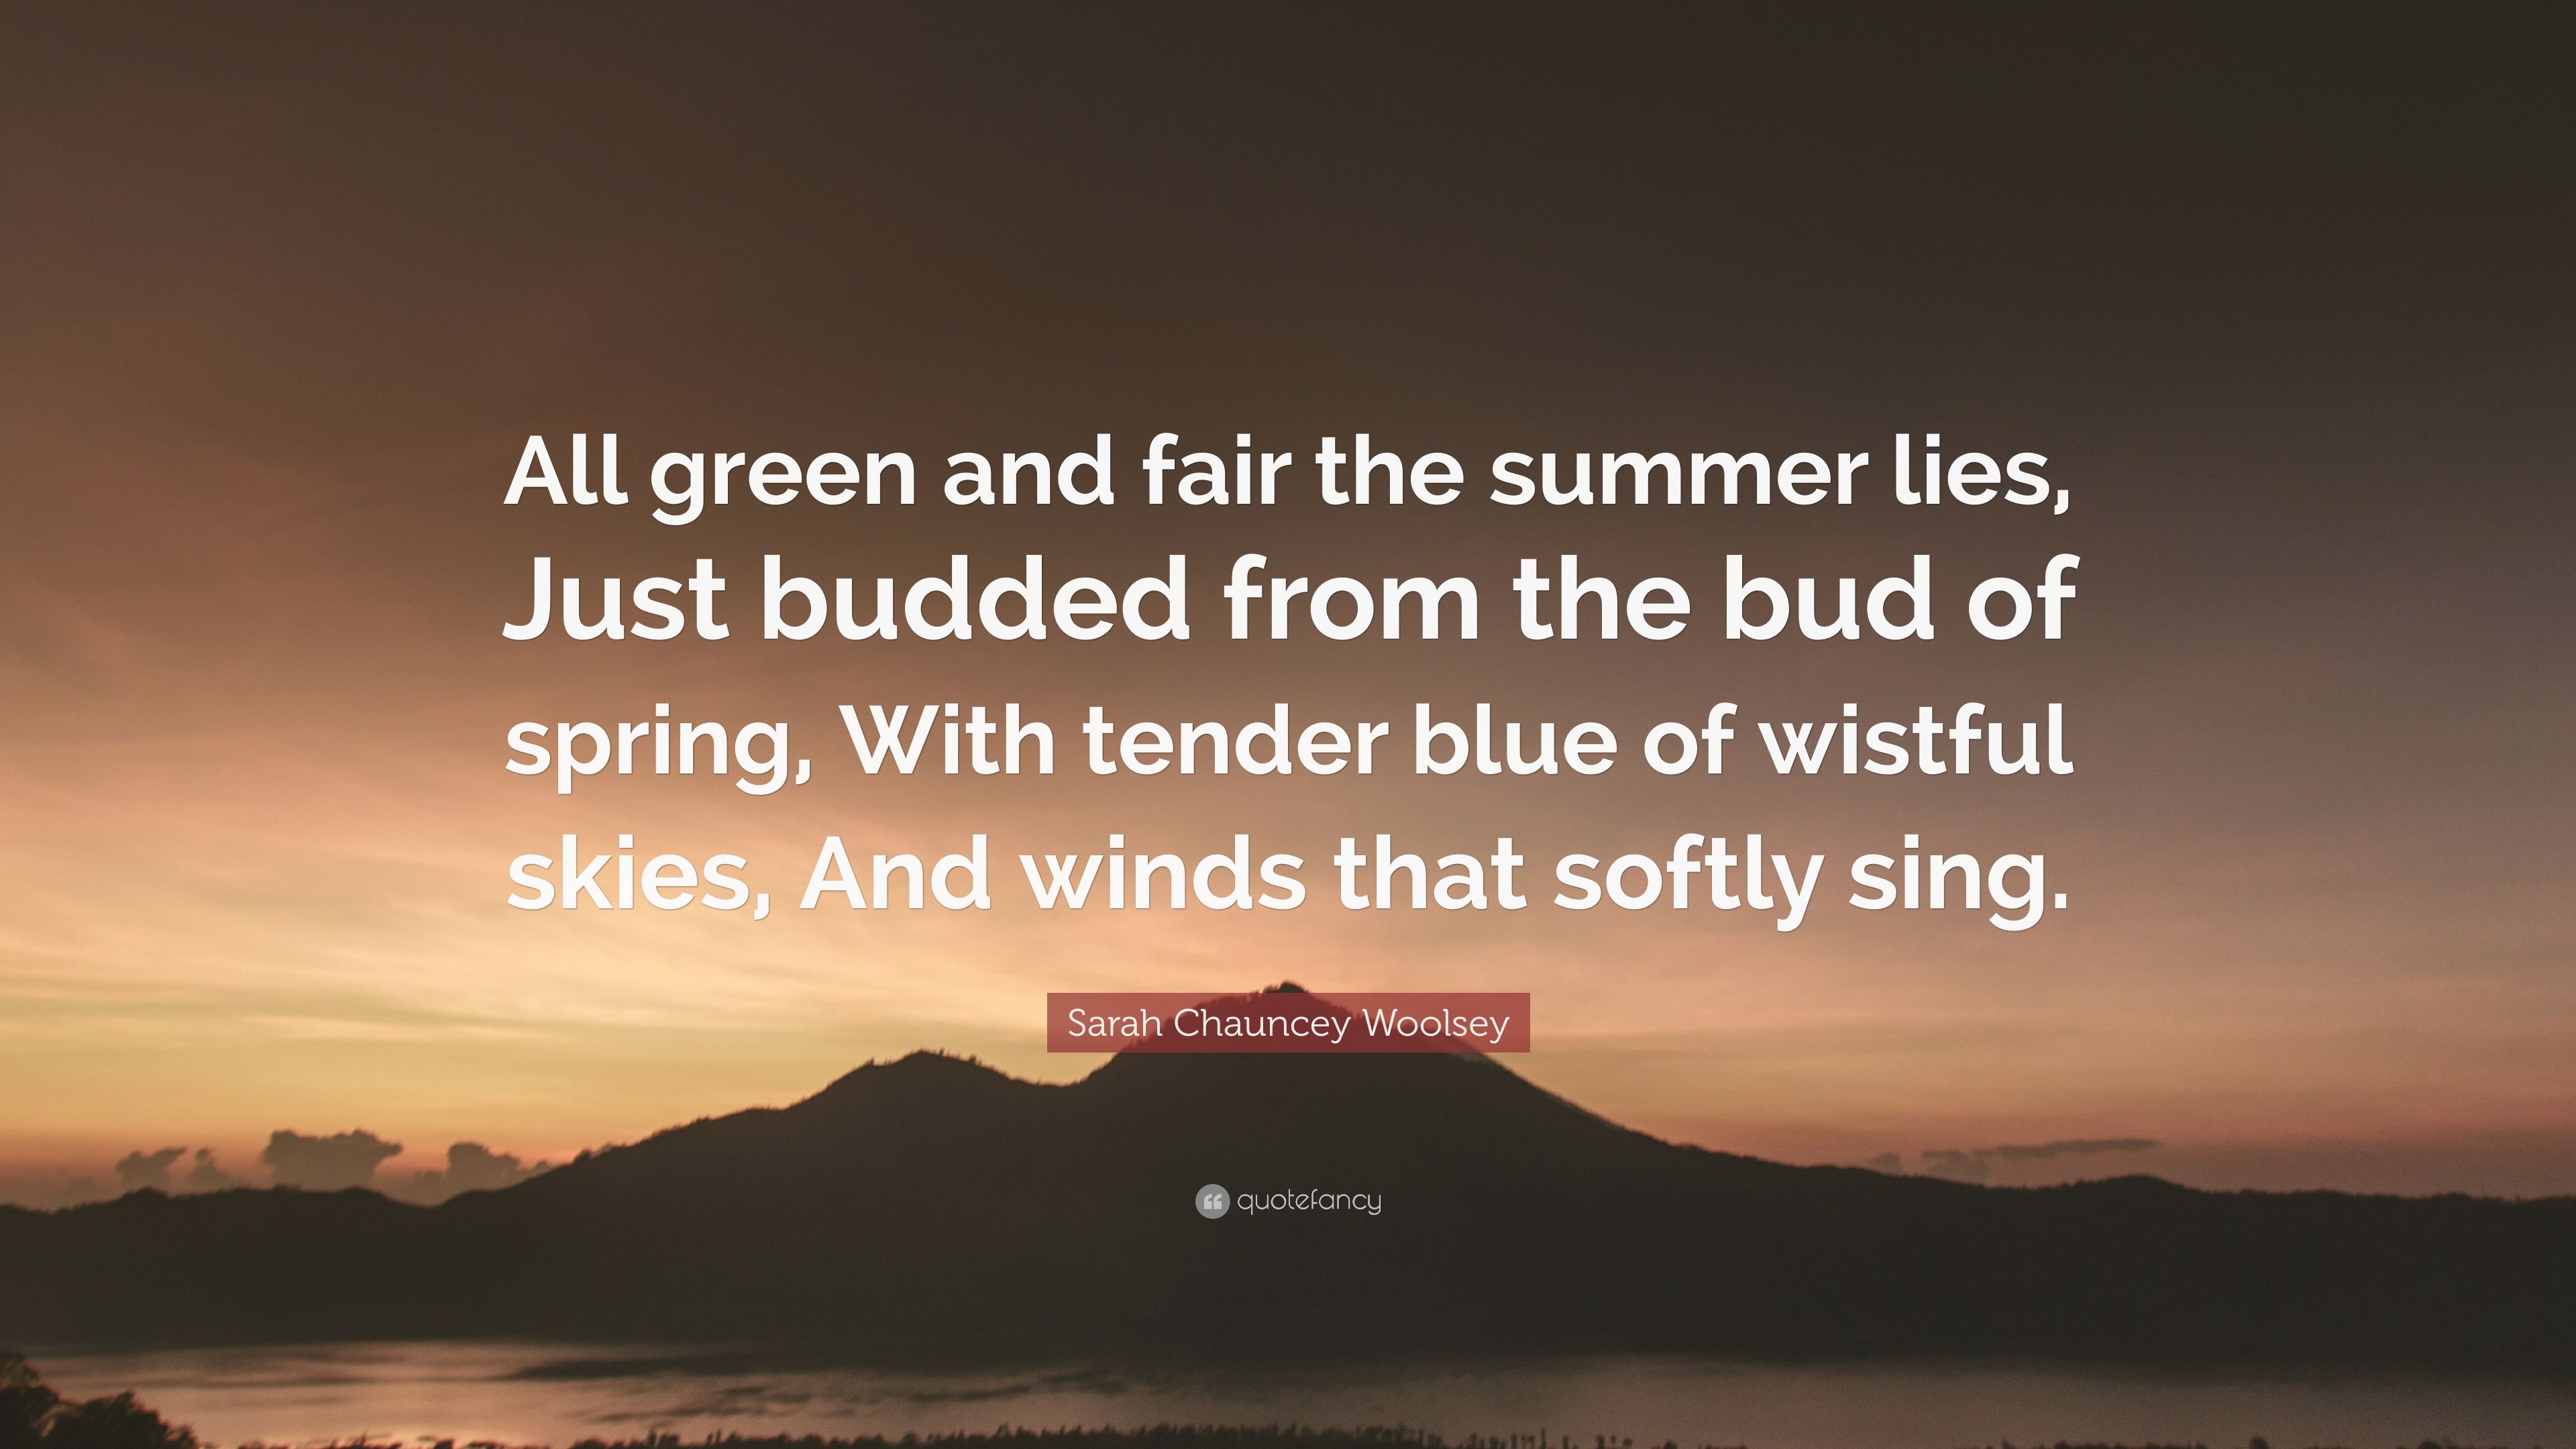 Sarah Chauncey Woolsey Quote: “All green and fair the summer lies